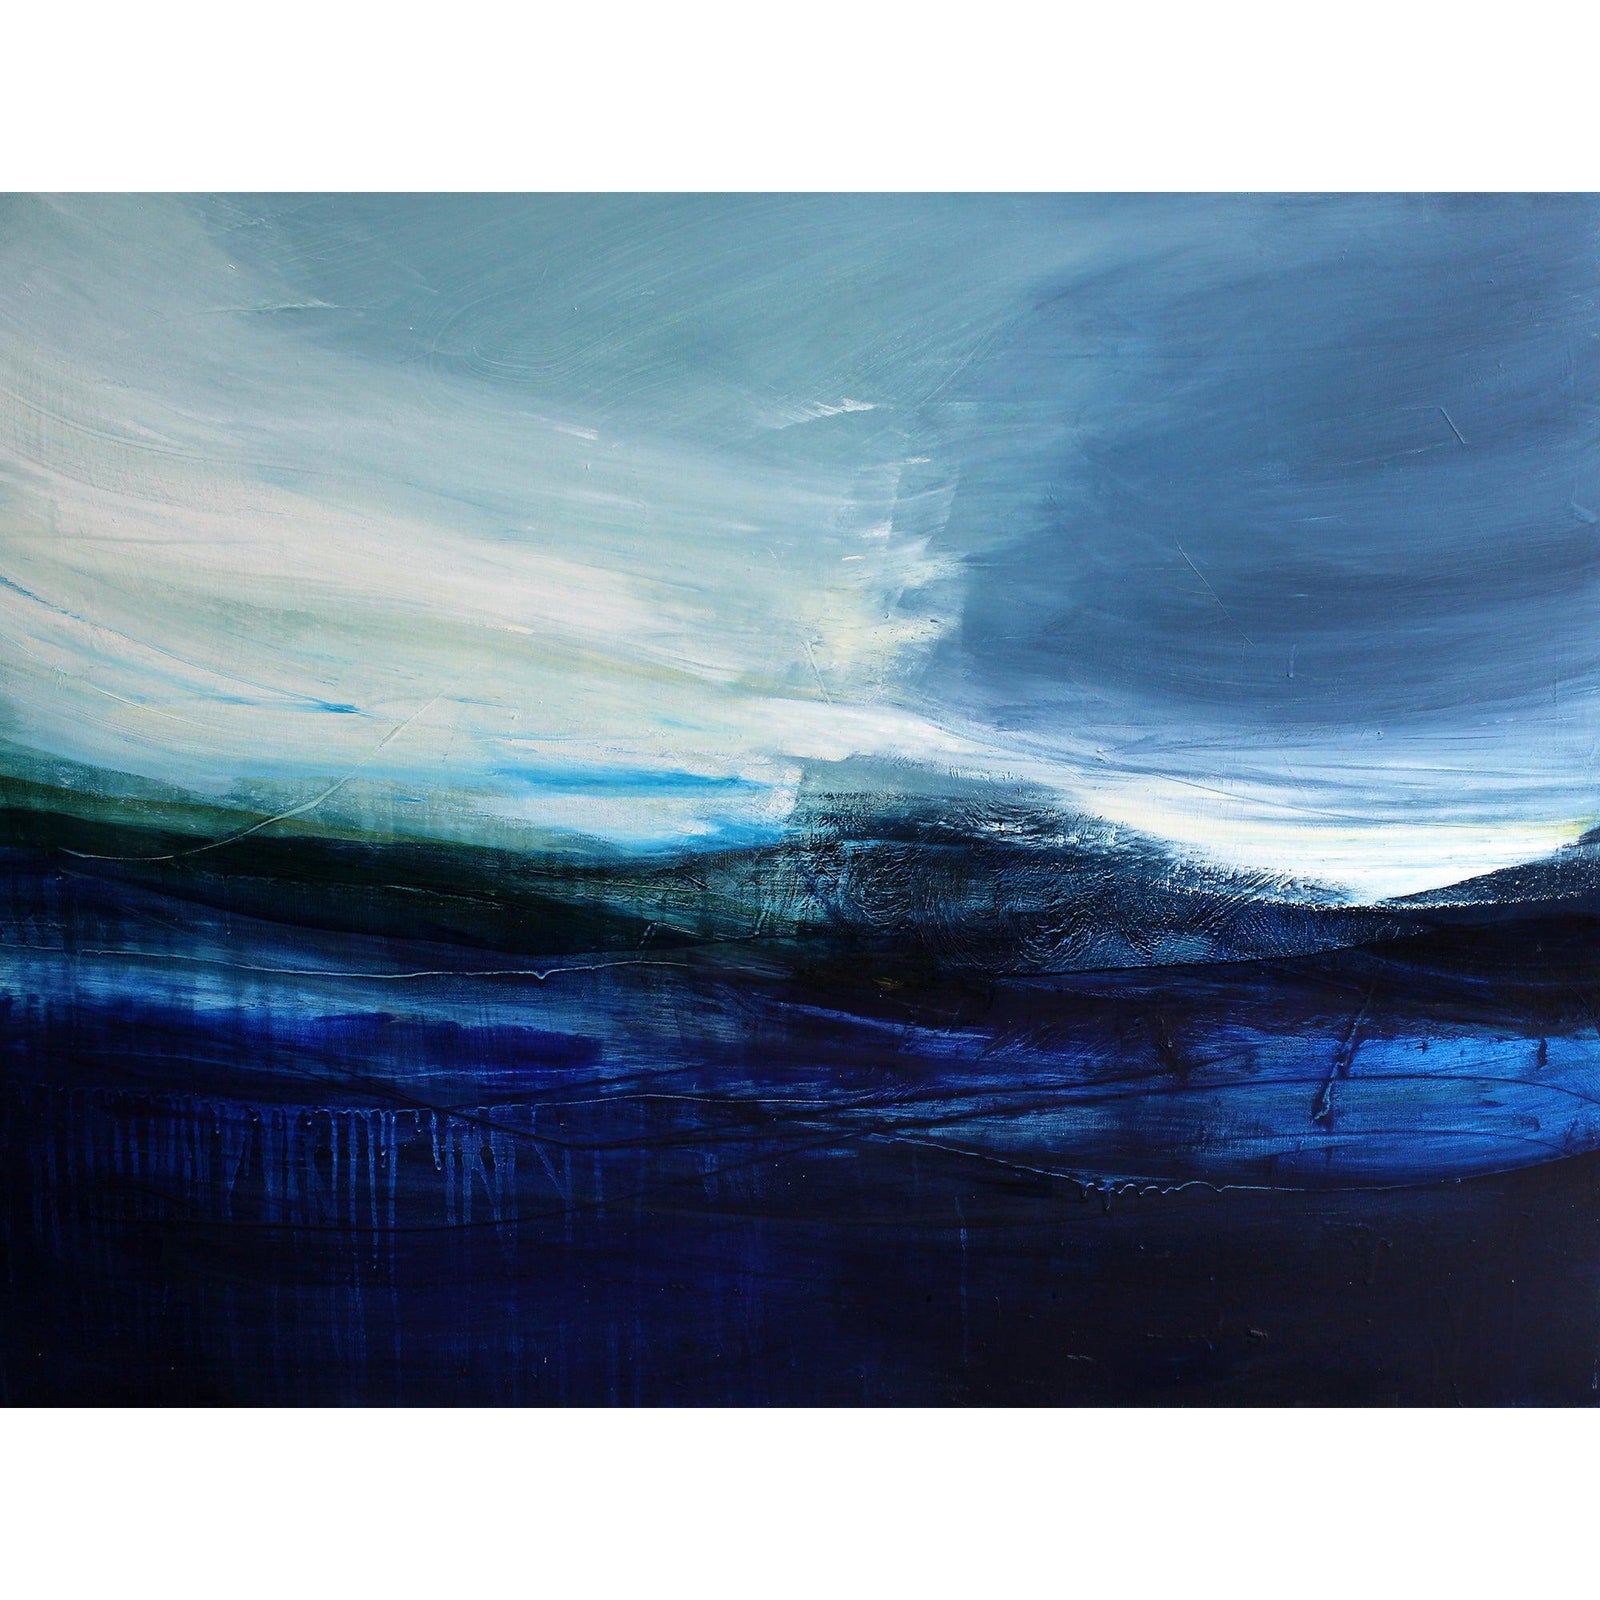 'Riders of the sea' oil original by Justine Lois Thorpe, available at Padstow Gallery, Cornwall